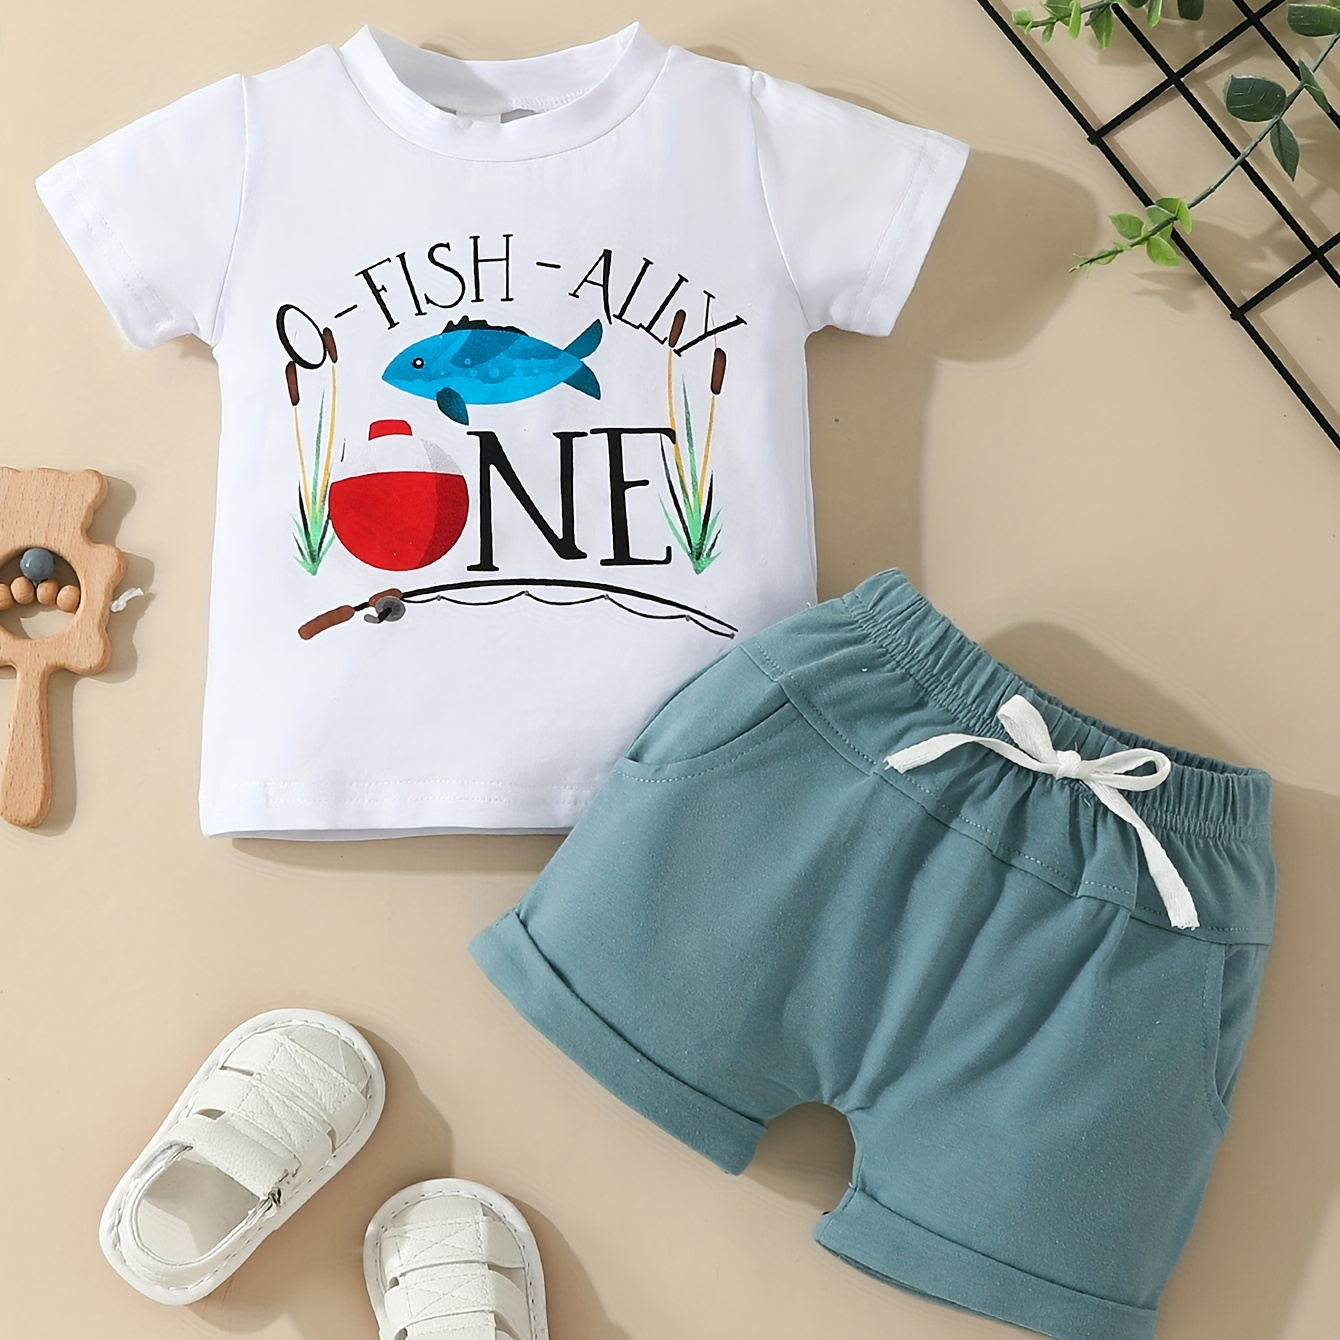 

2pcs Infant & Toddler's O-fish-ally Print Summer Outfit, T-shirt & Casual Shorts, Baby Boy's Clothes